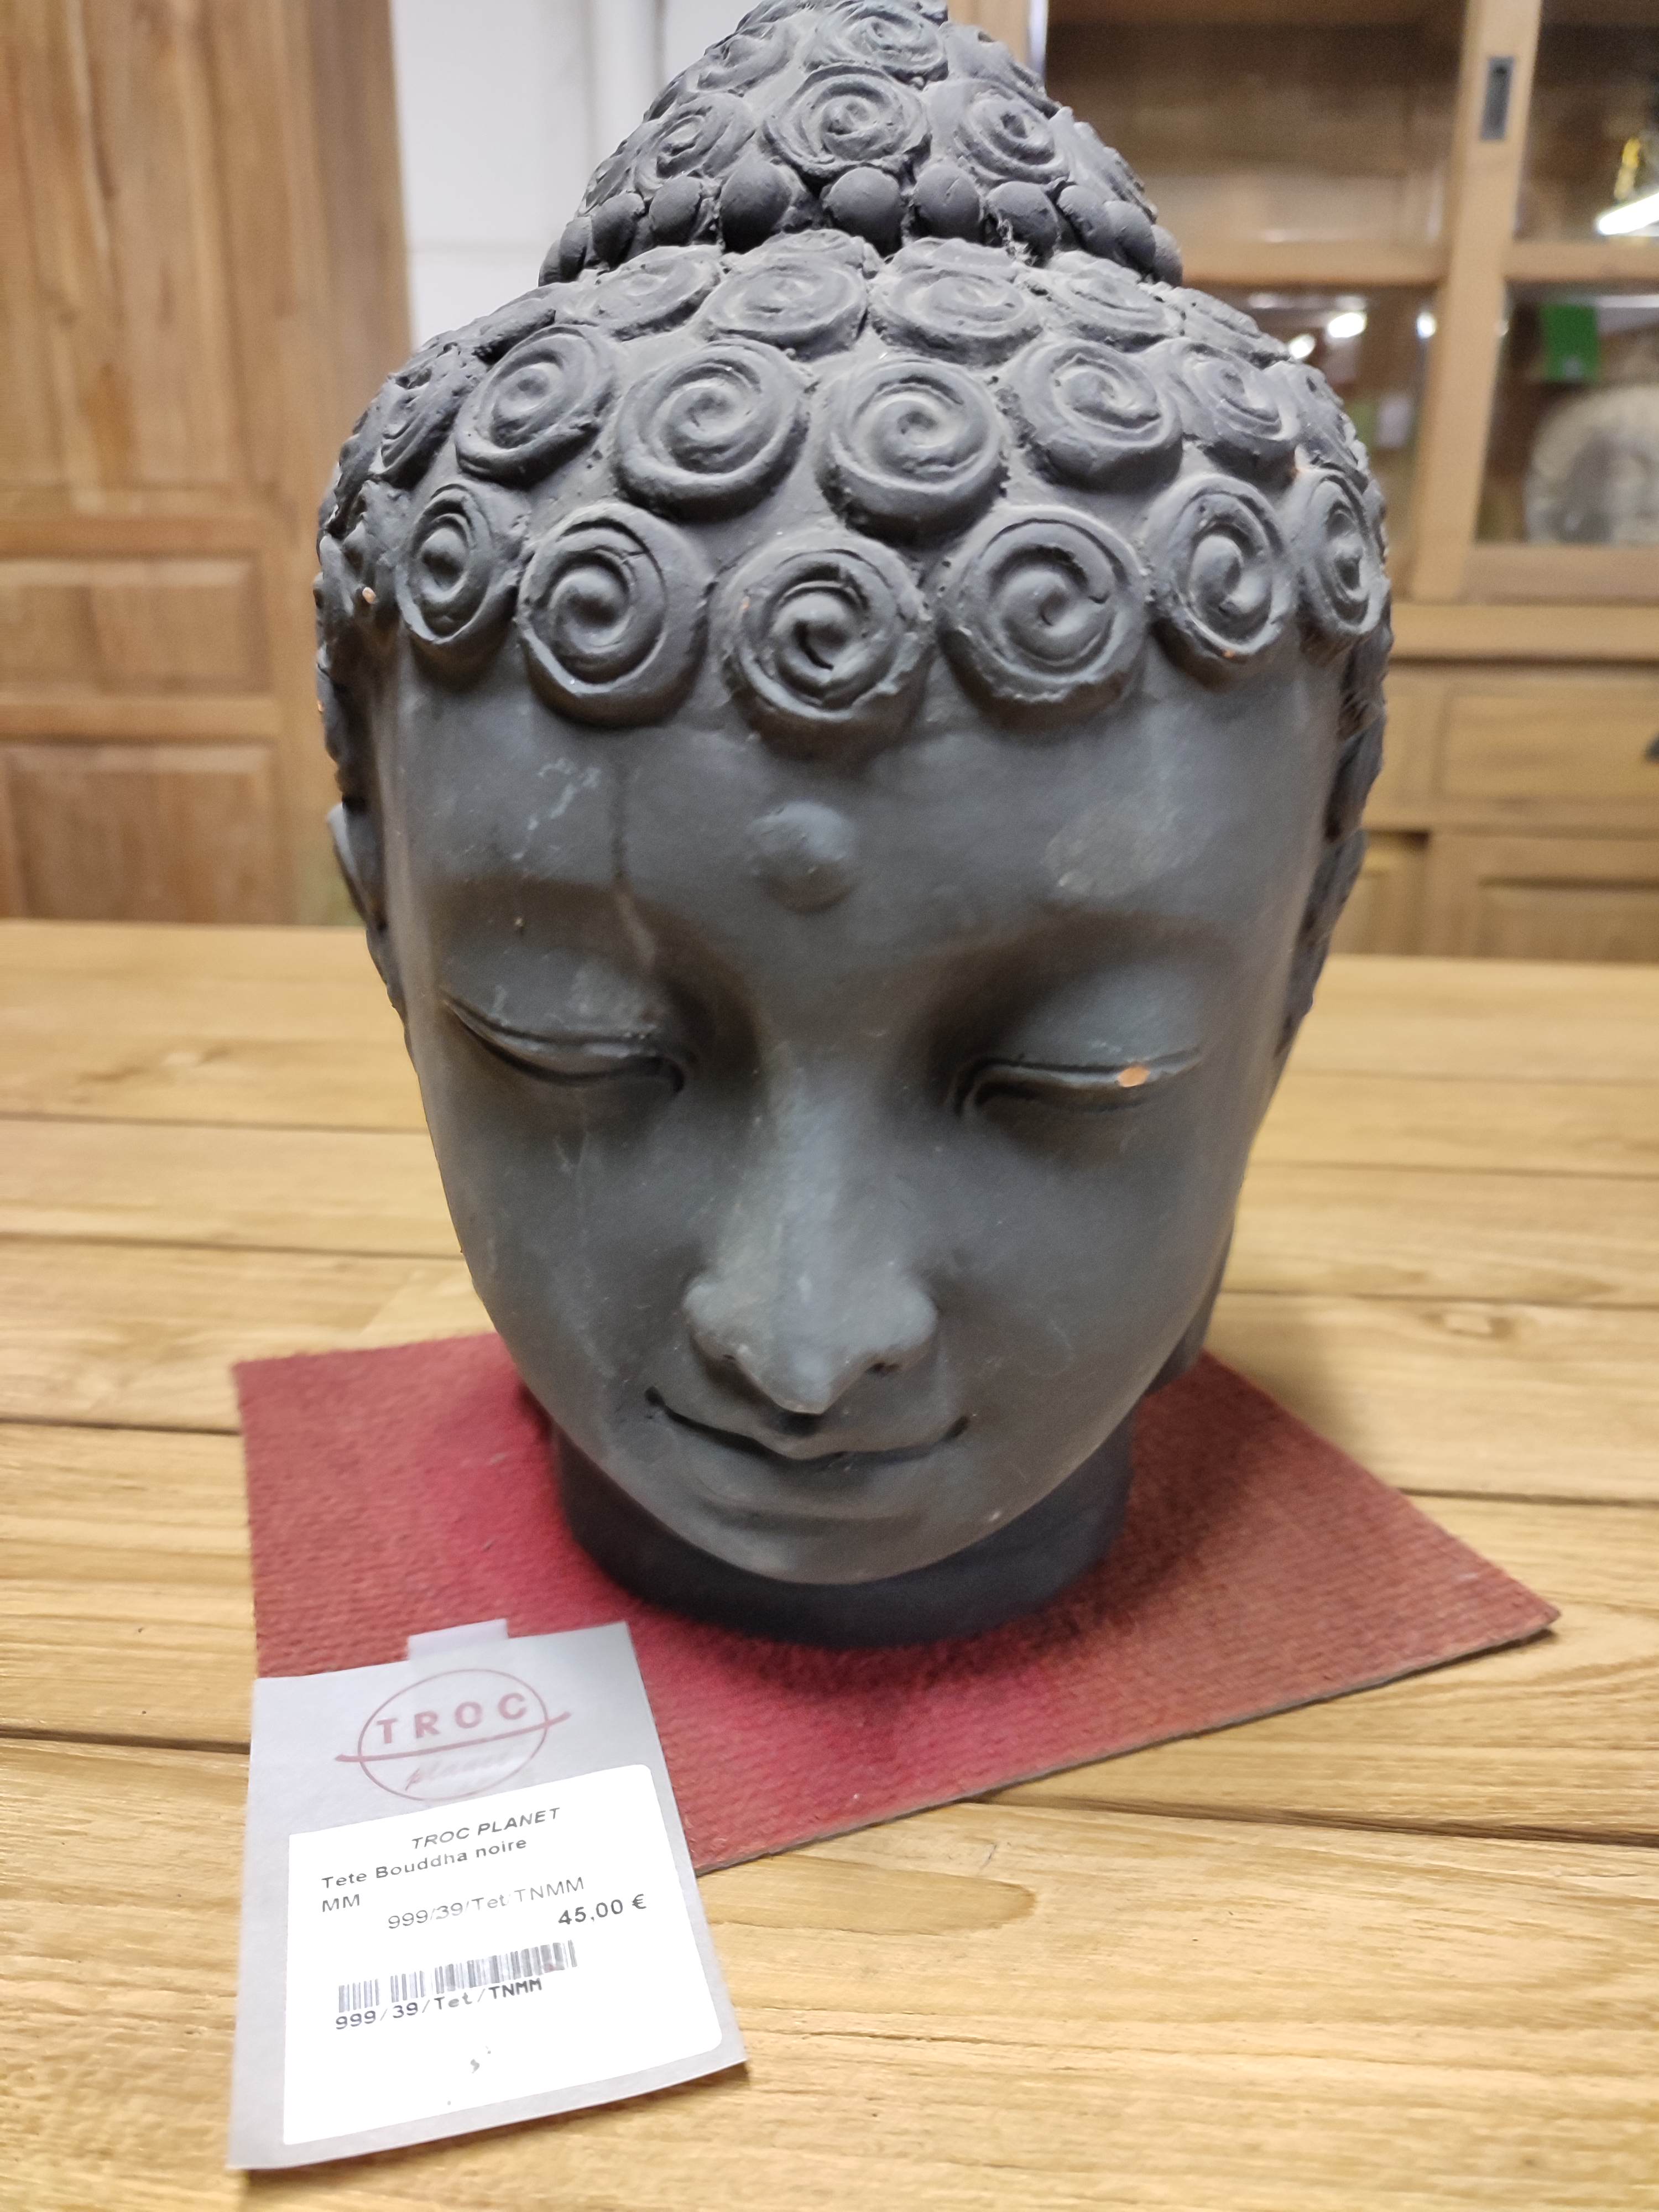 <p>Tete Bouddha noire<br />MM<br />45,00 € T.T.C<br /><a href="/Article/1575?type=neuf" style="color:white;" target="_blank">Lien vers l&#39;article</a></p>